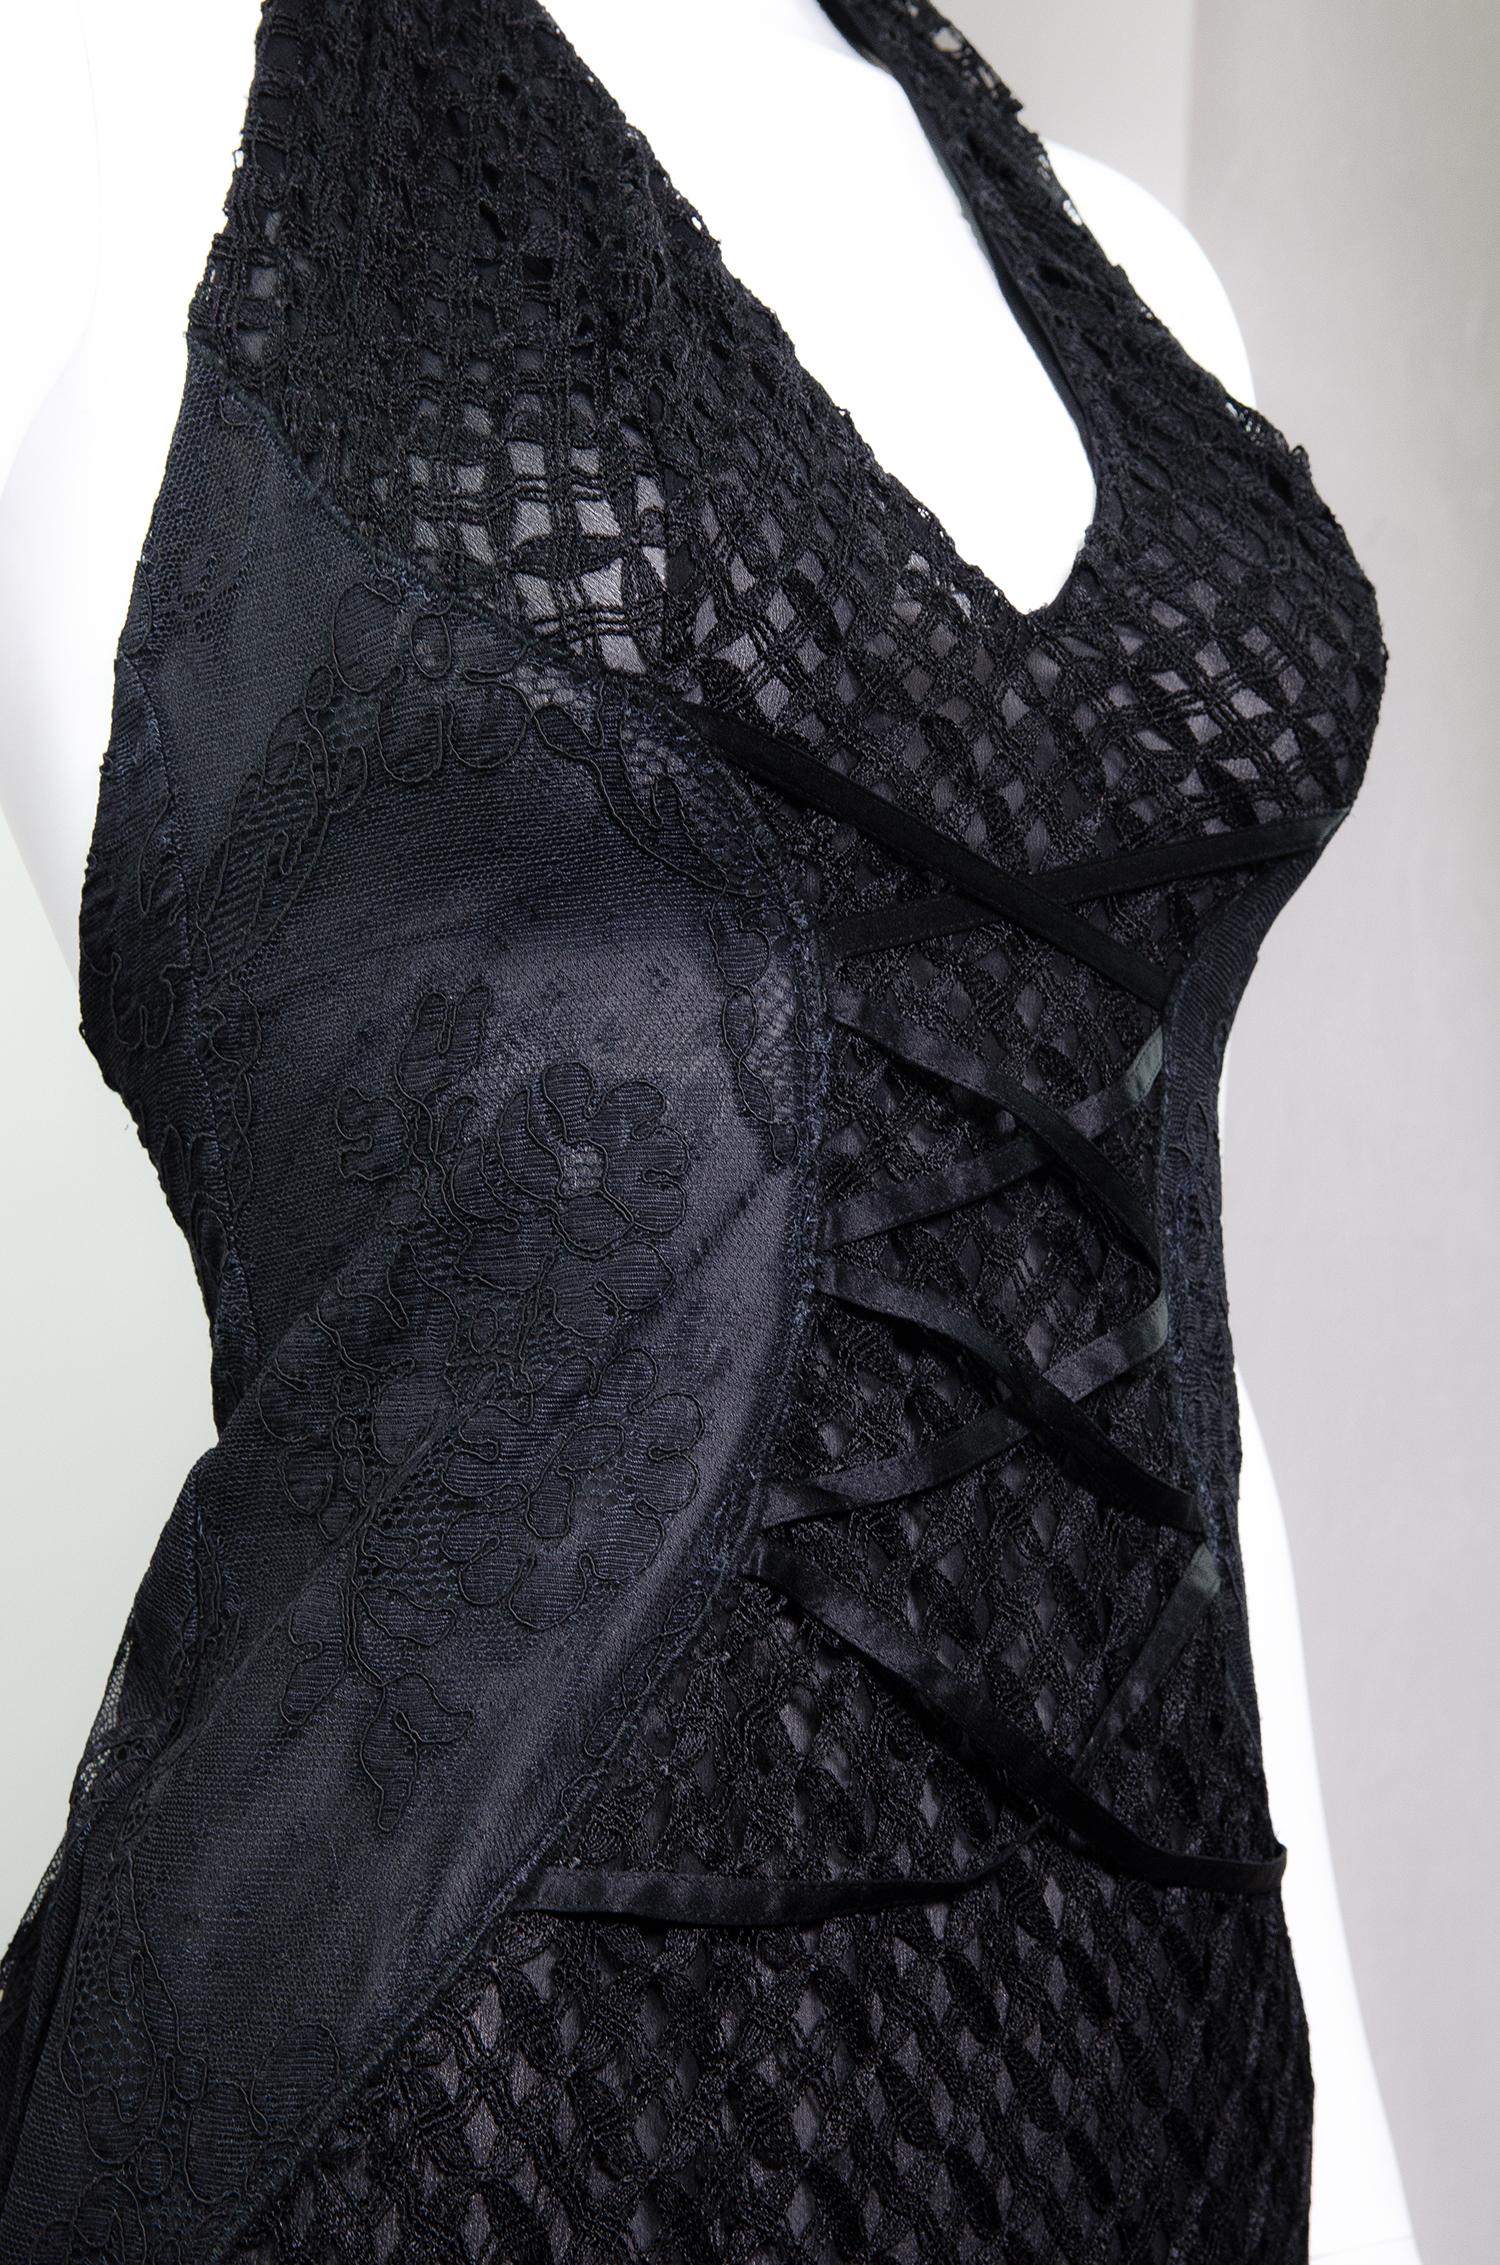 VERSACE S/S 2002 Vintage Sheer Lace Knit Gown  For Sale 6